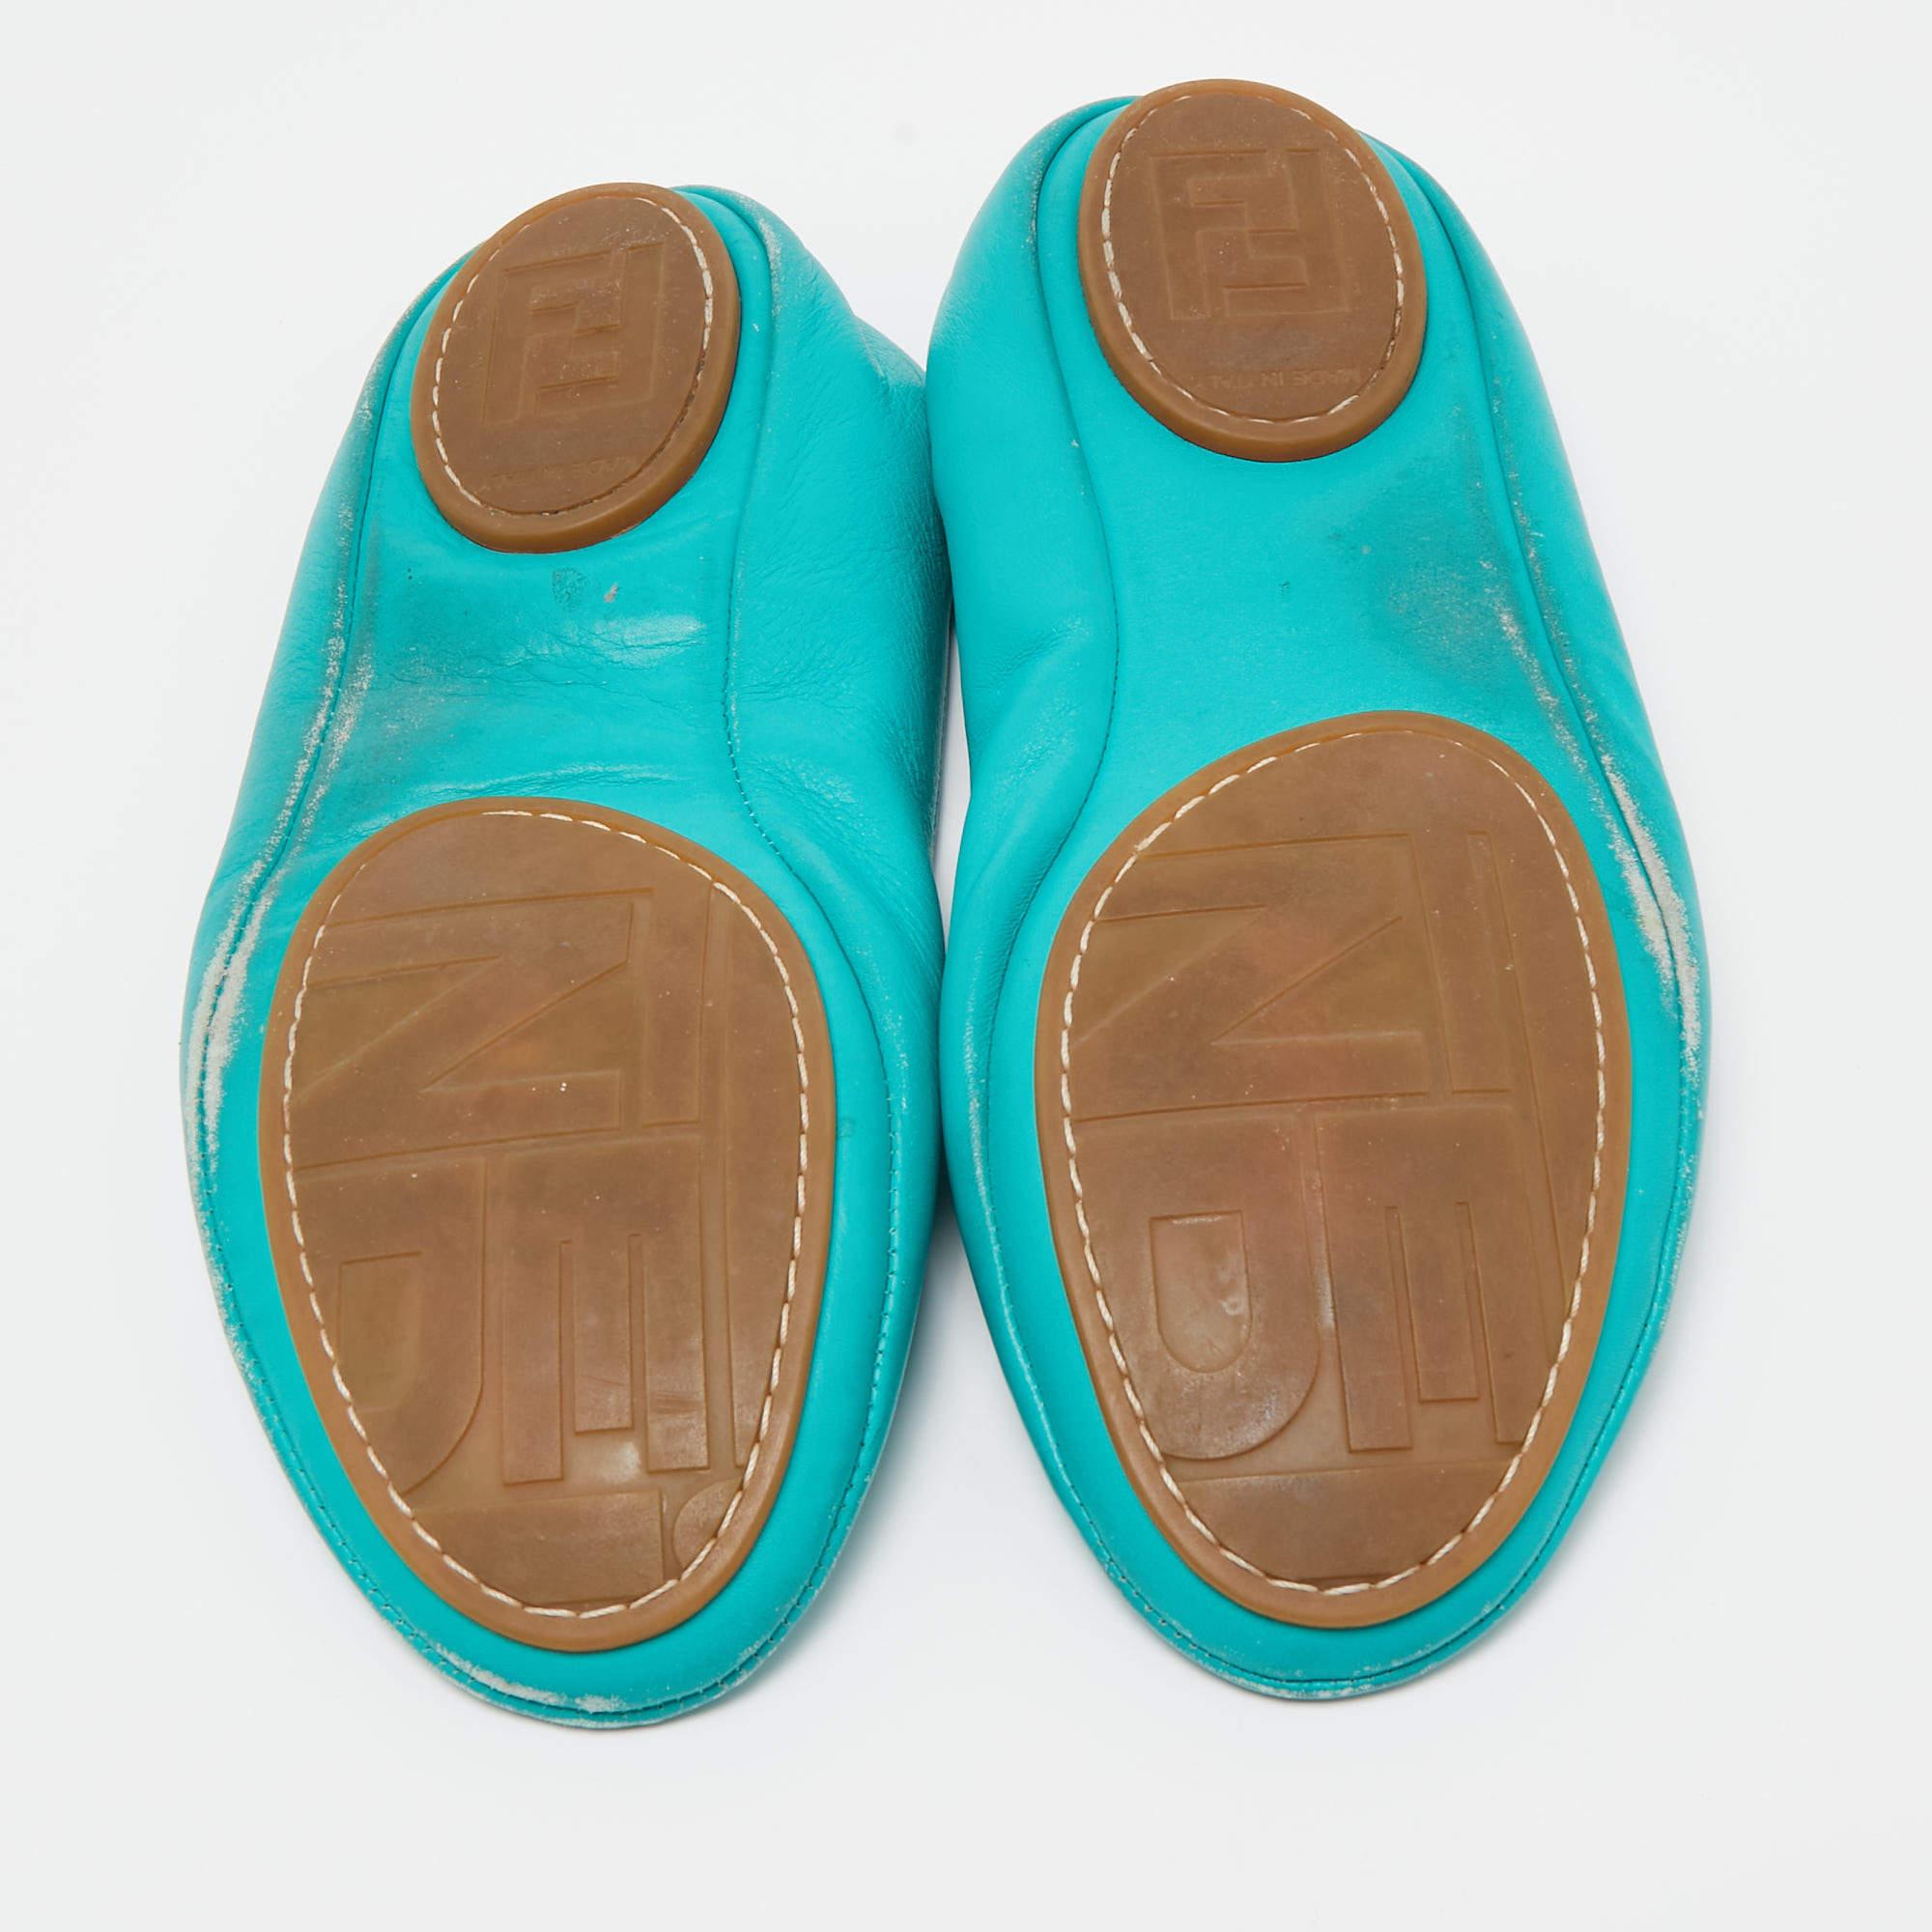 Fendi Turquoise Leather Bow Scrunch Ballet Flats Size 39 2